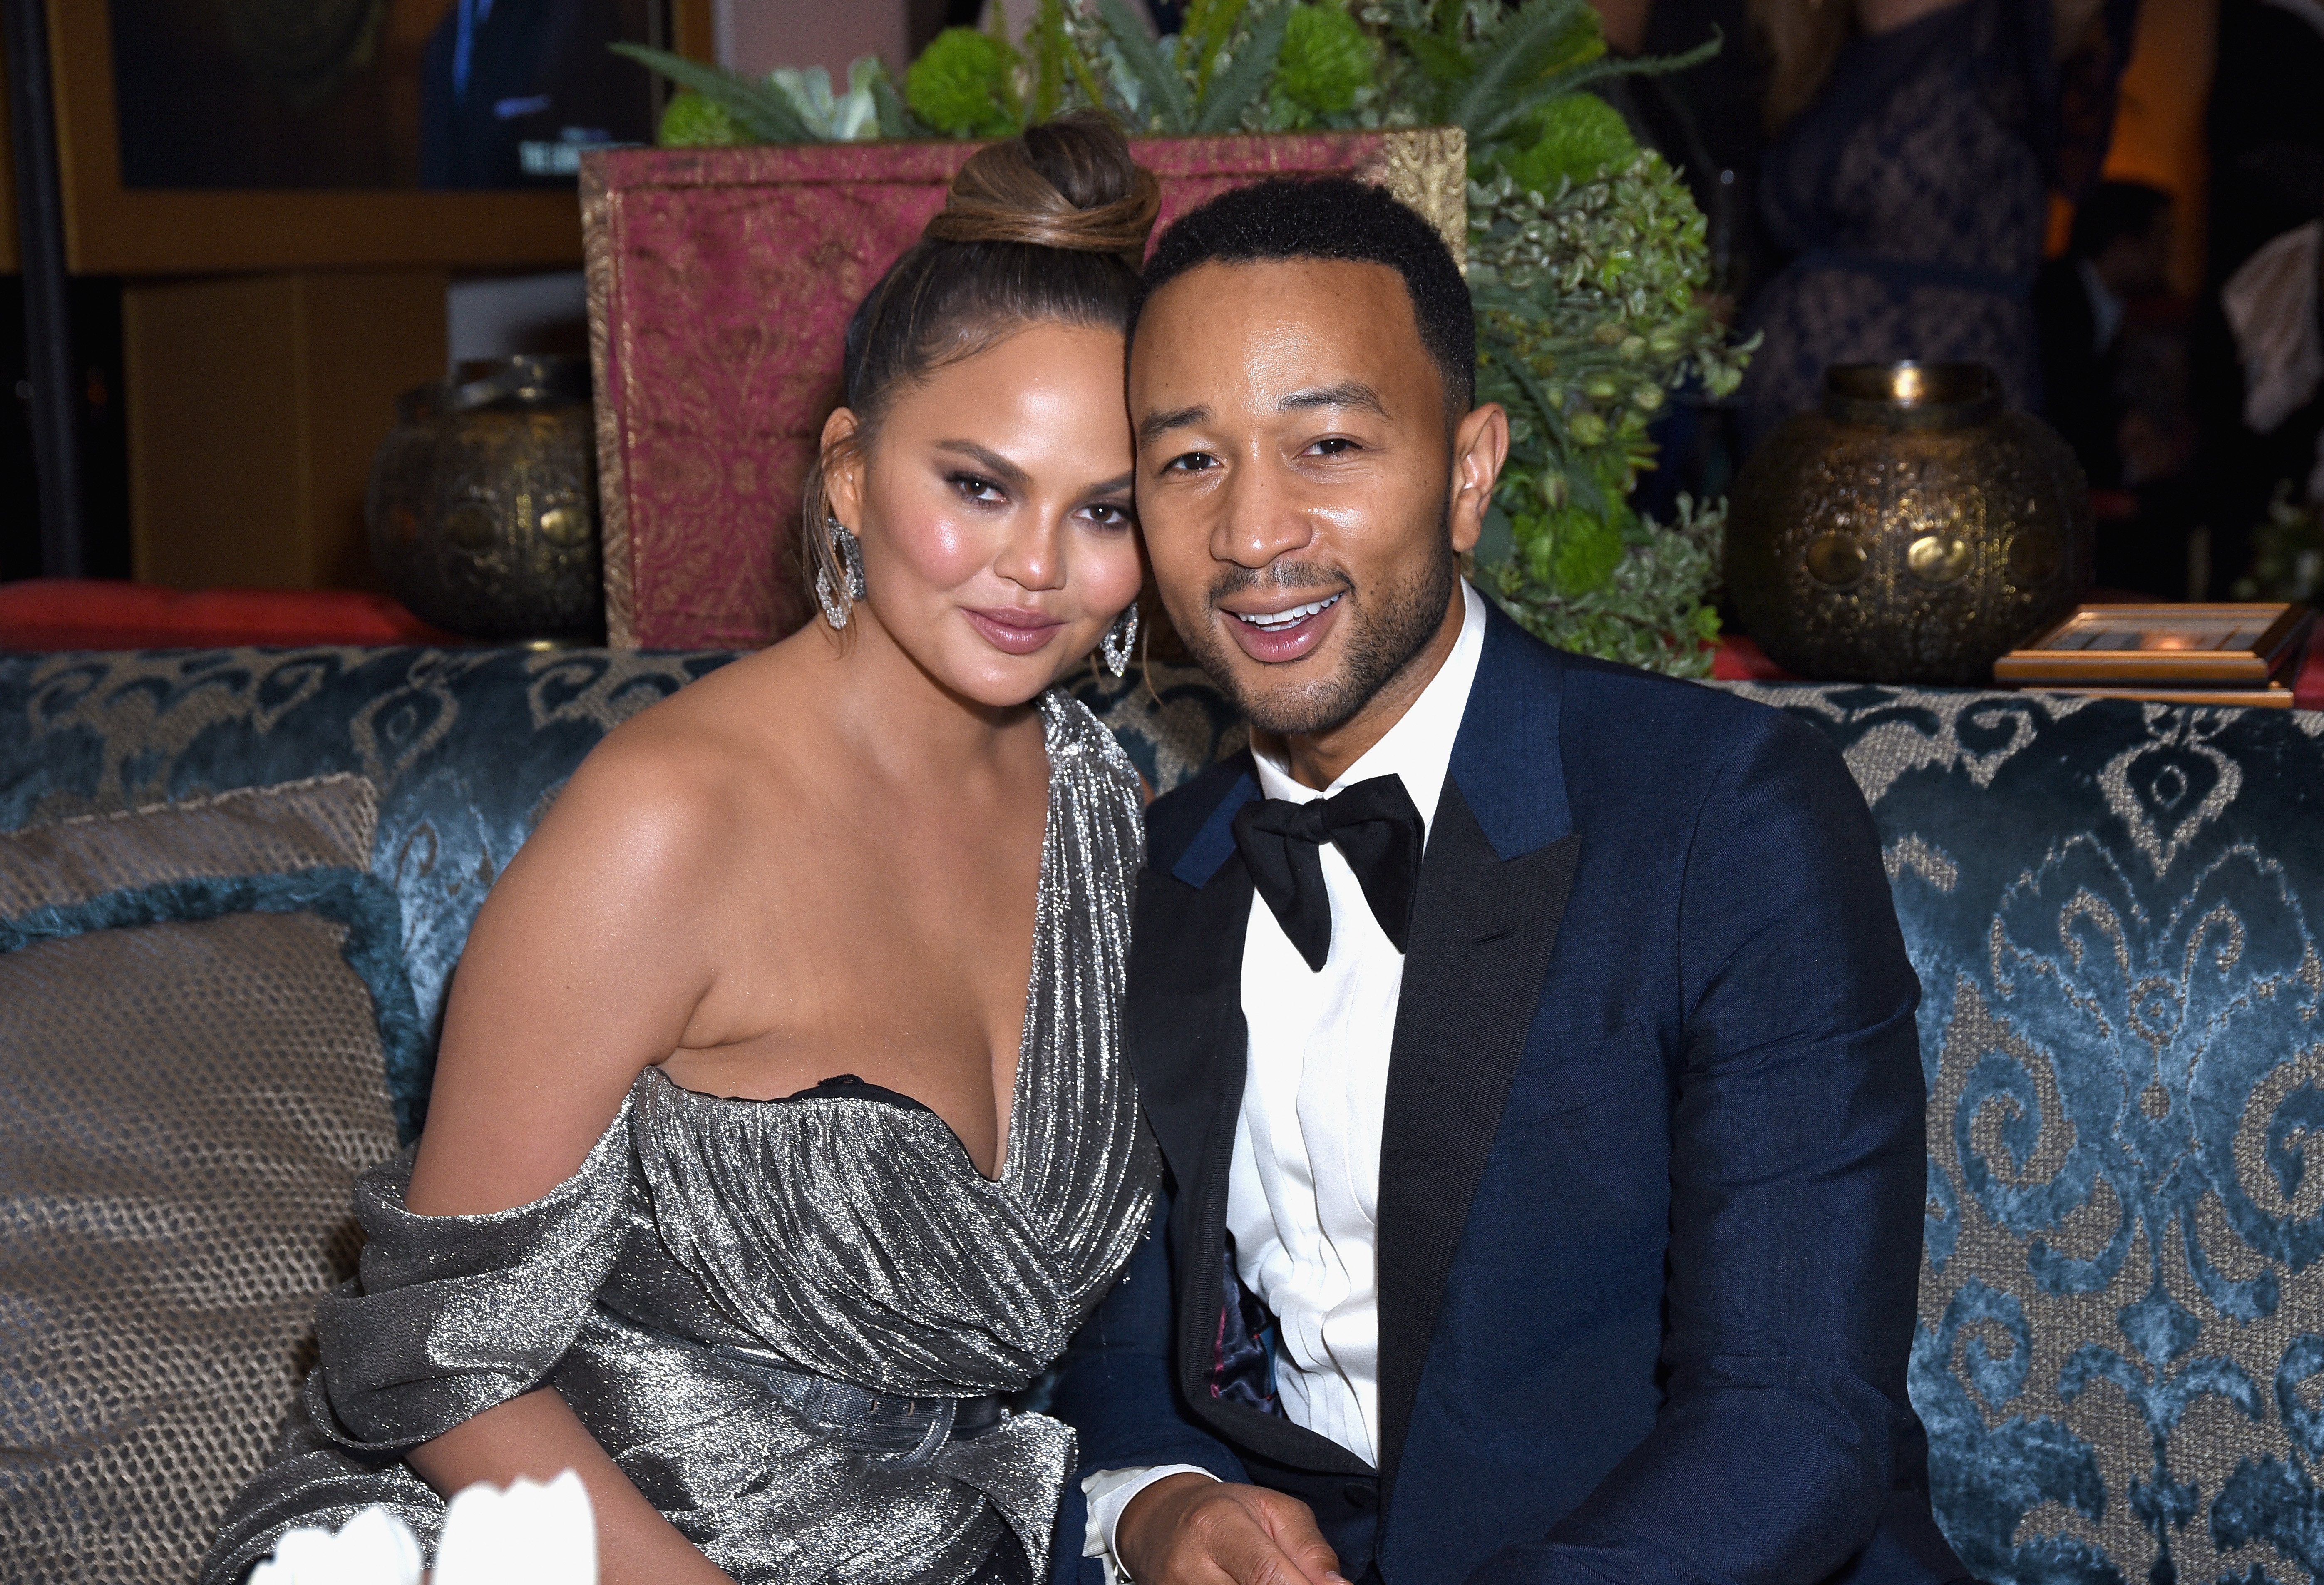 Chrissy Teigen and John Legend attend Hulu's 2018 Emmy Party on September 17, 2018 | Photo: Getty Images